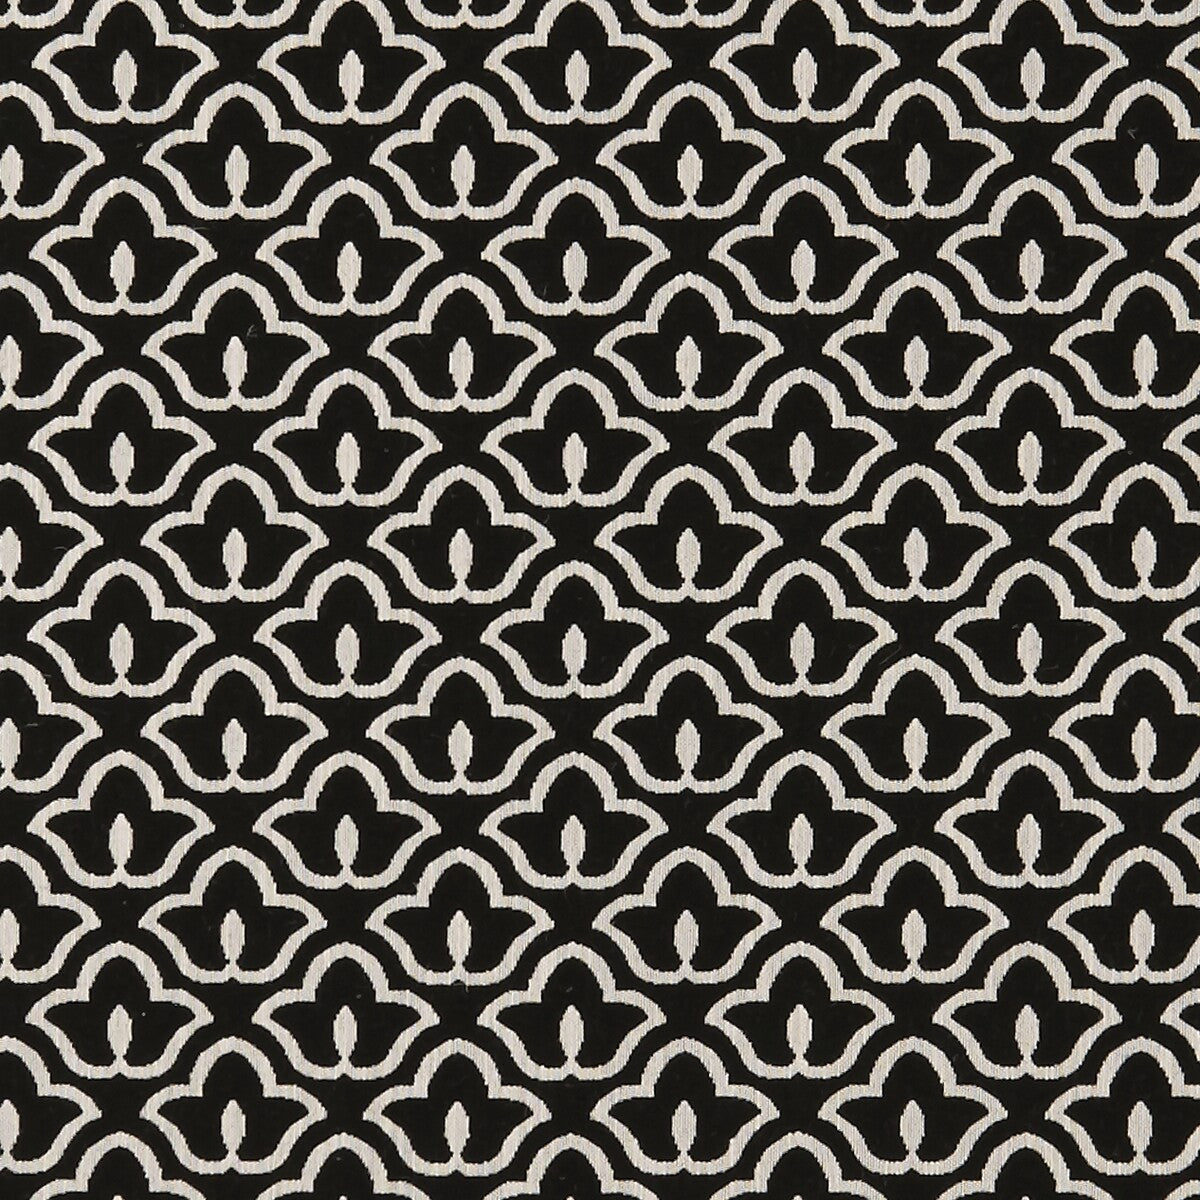 Bw1014 fabric in black/white color - pattern F0887/01.CAC.0 - by Clarke And Clarke in the Clarke &amp; Clarke Black + White collection